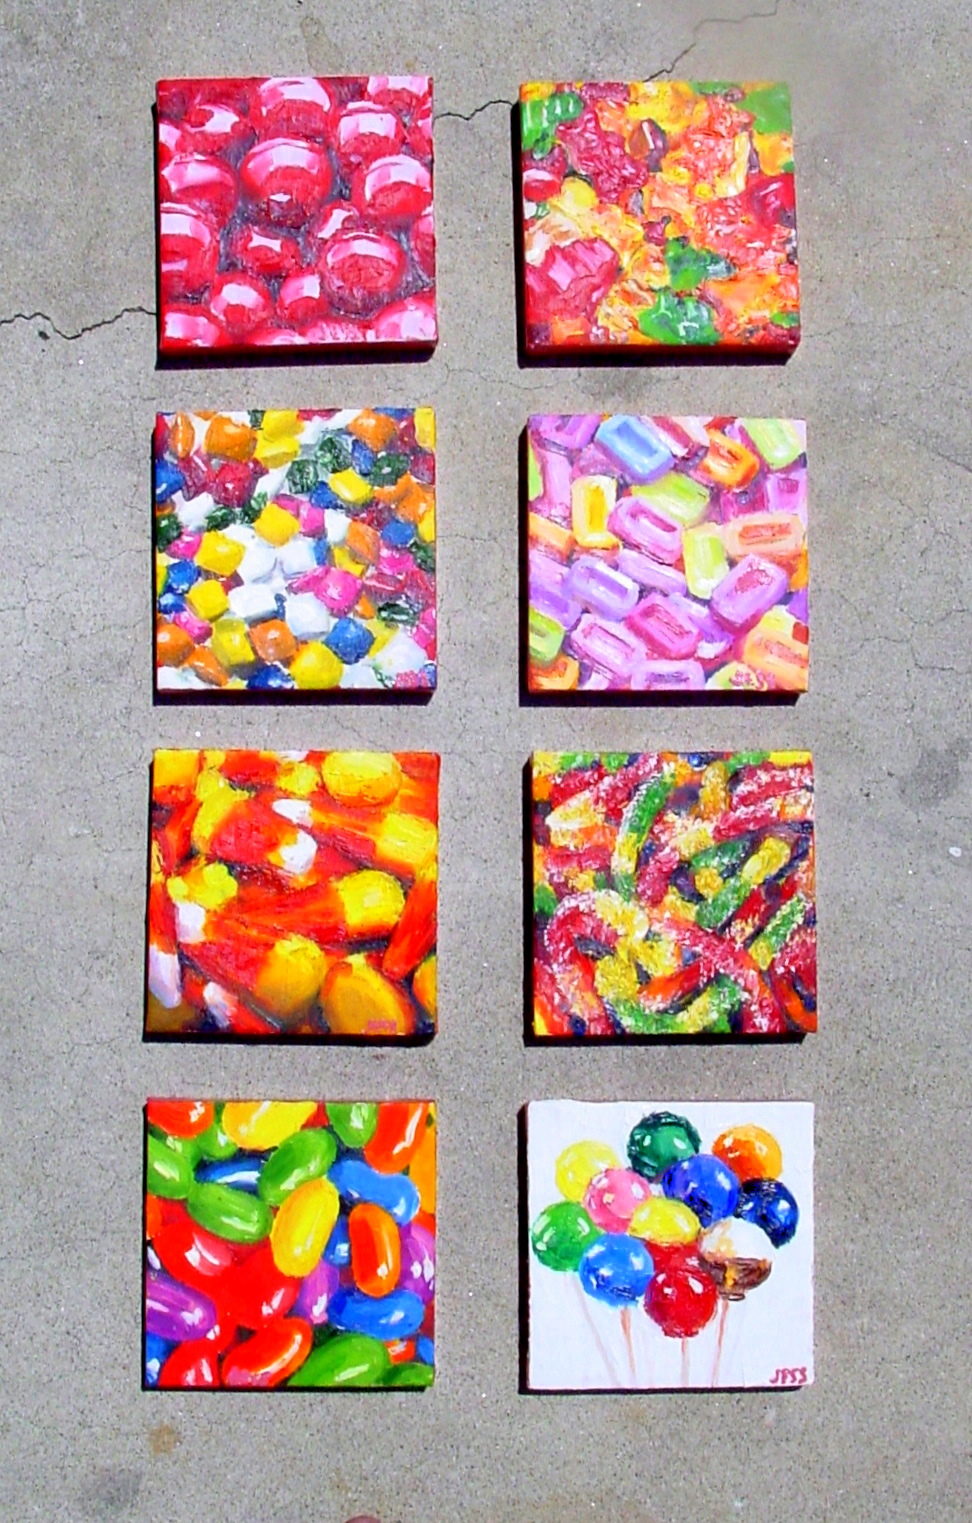 Delicious Oil Paintings 6x6'' each Jessica Siemens 2009